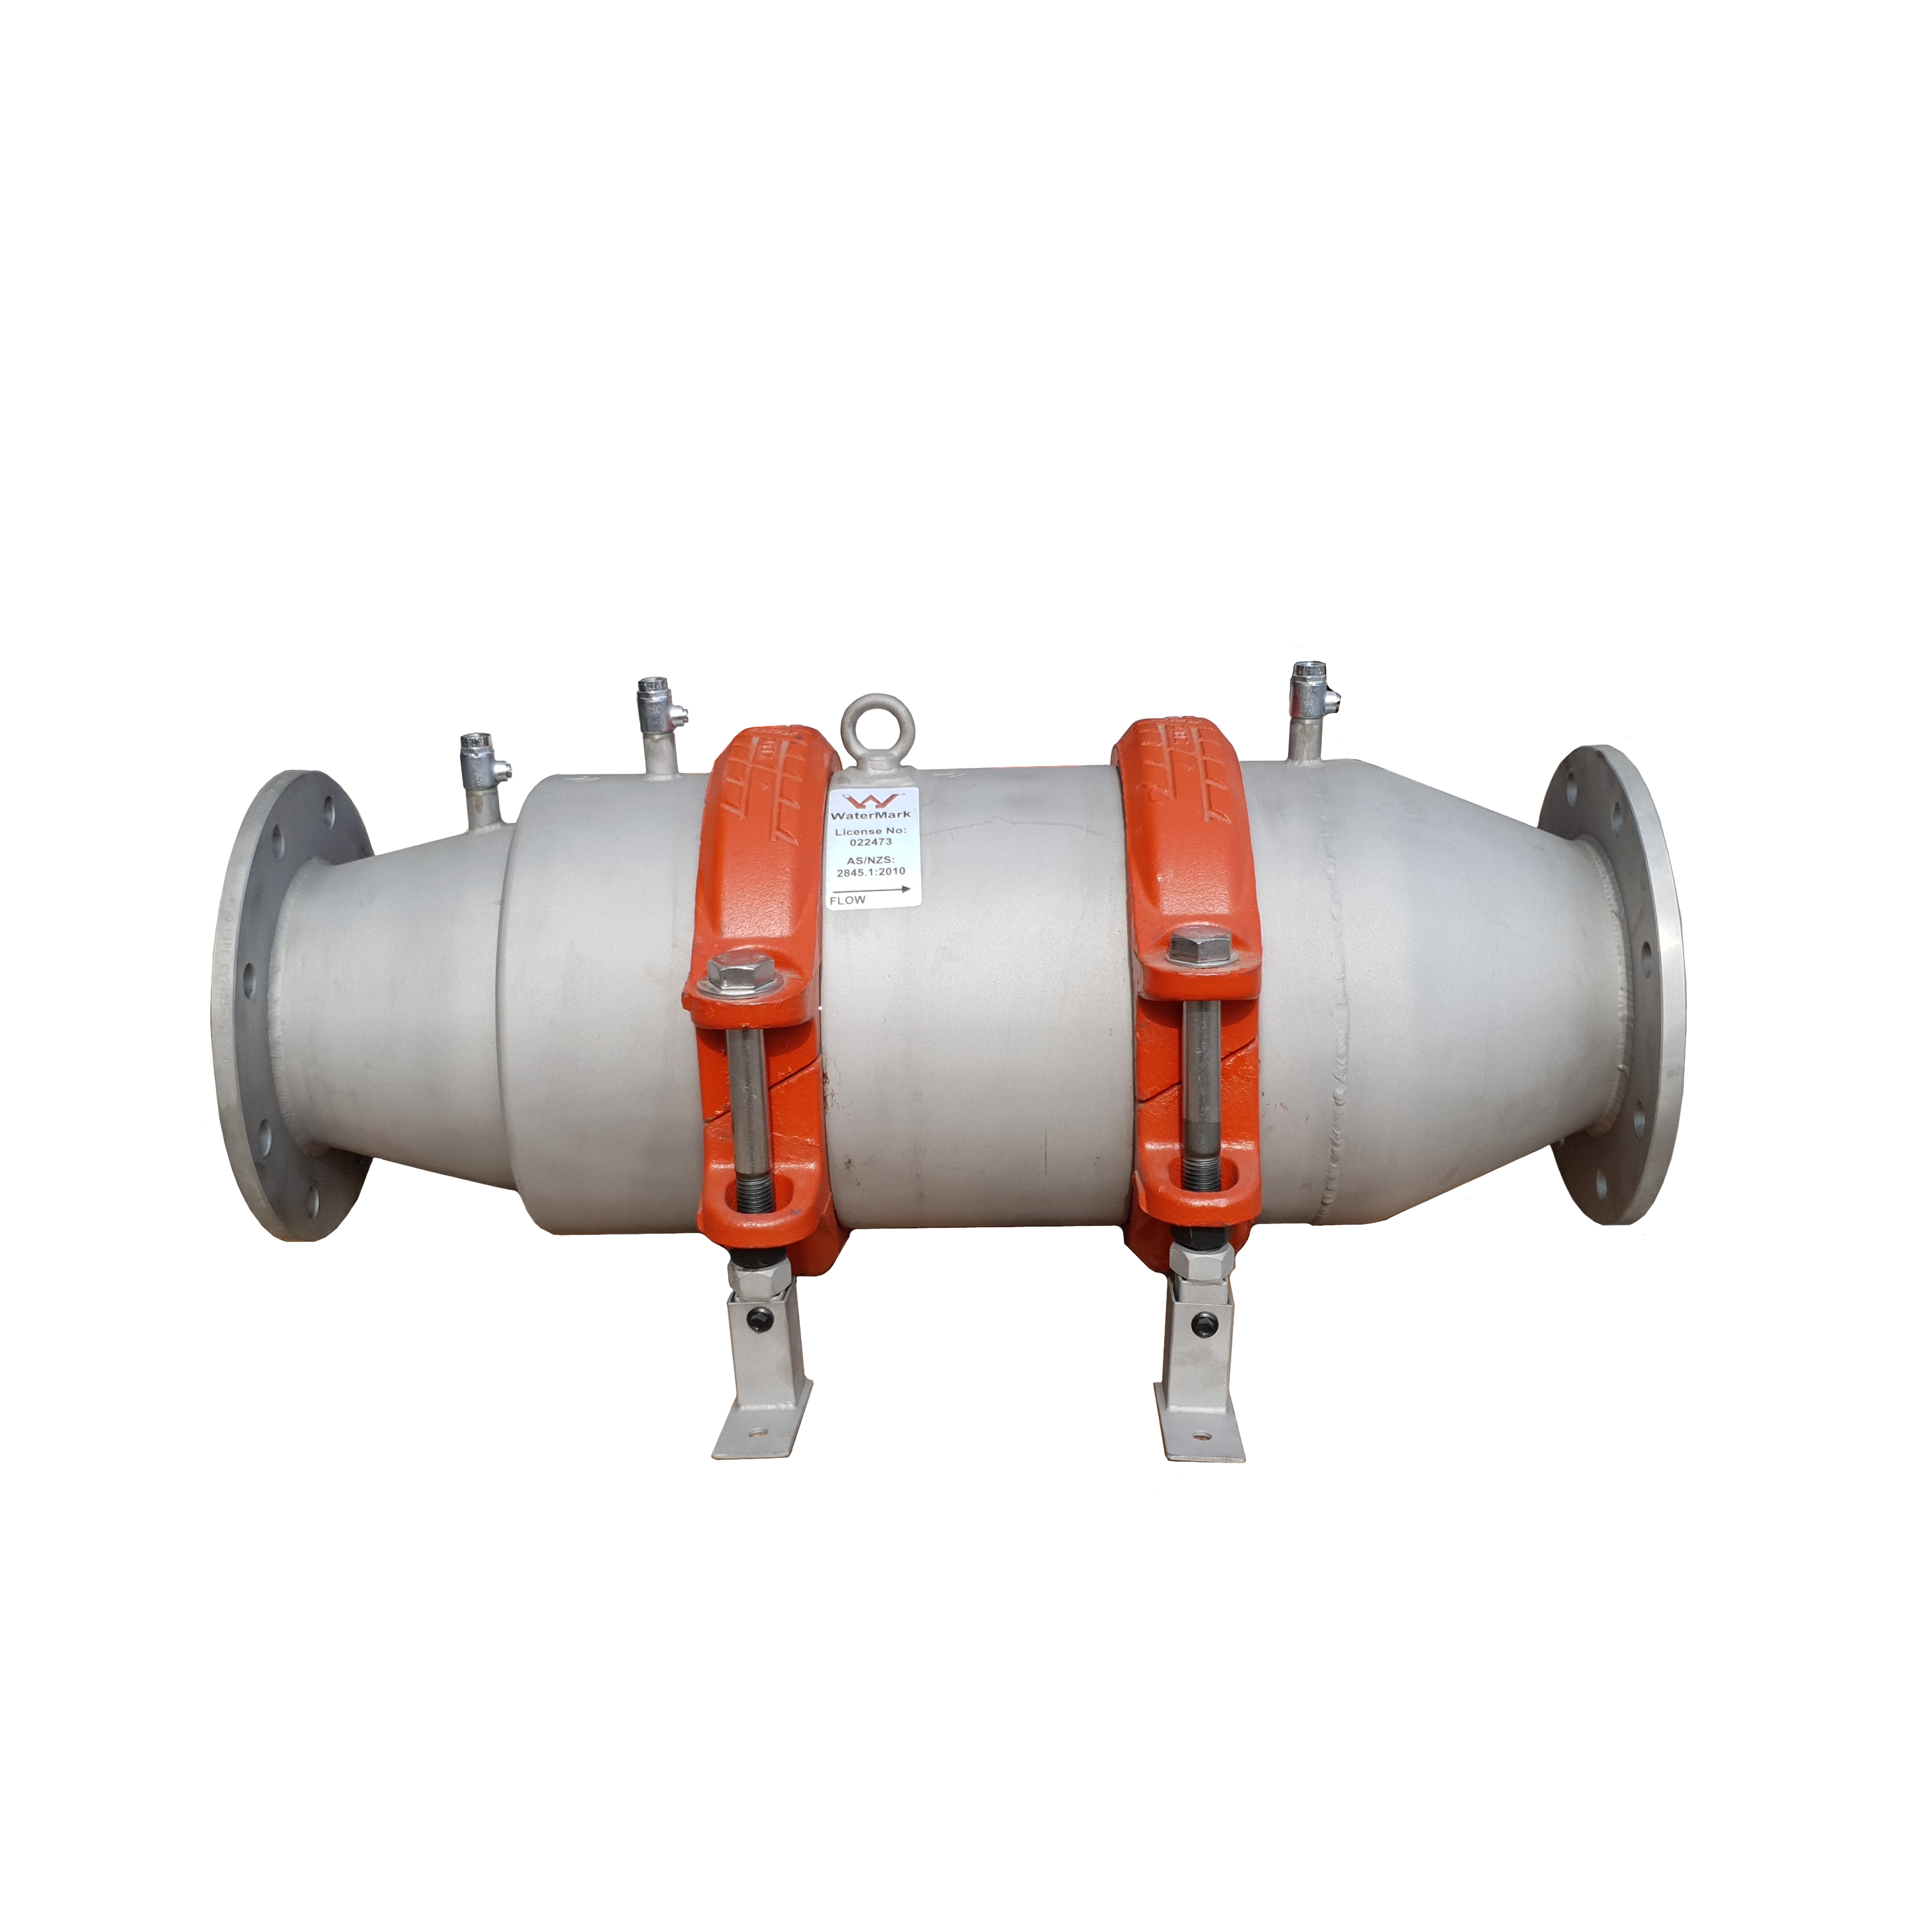 150mm MetCheck double check backflow prevention device. Built from 316 Stainless steel